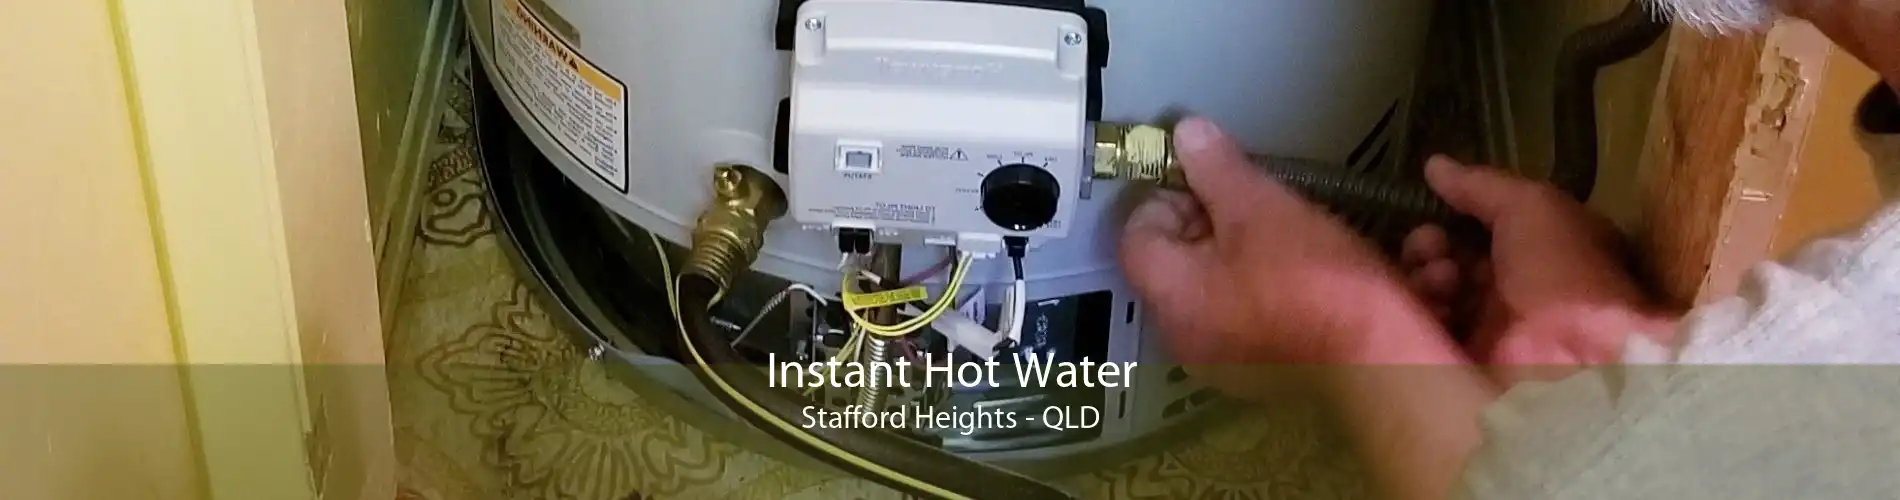 Instant Hot Water Stafford Heights - QLD